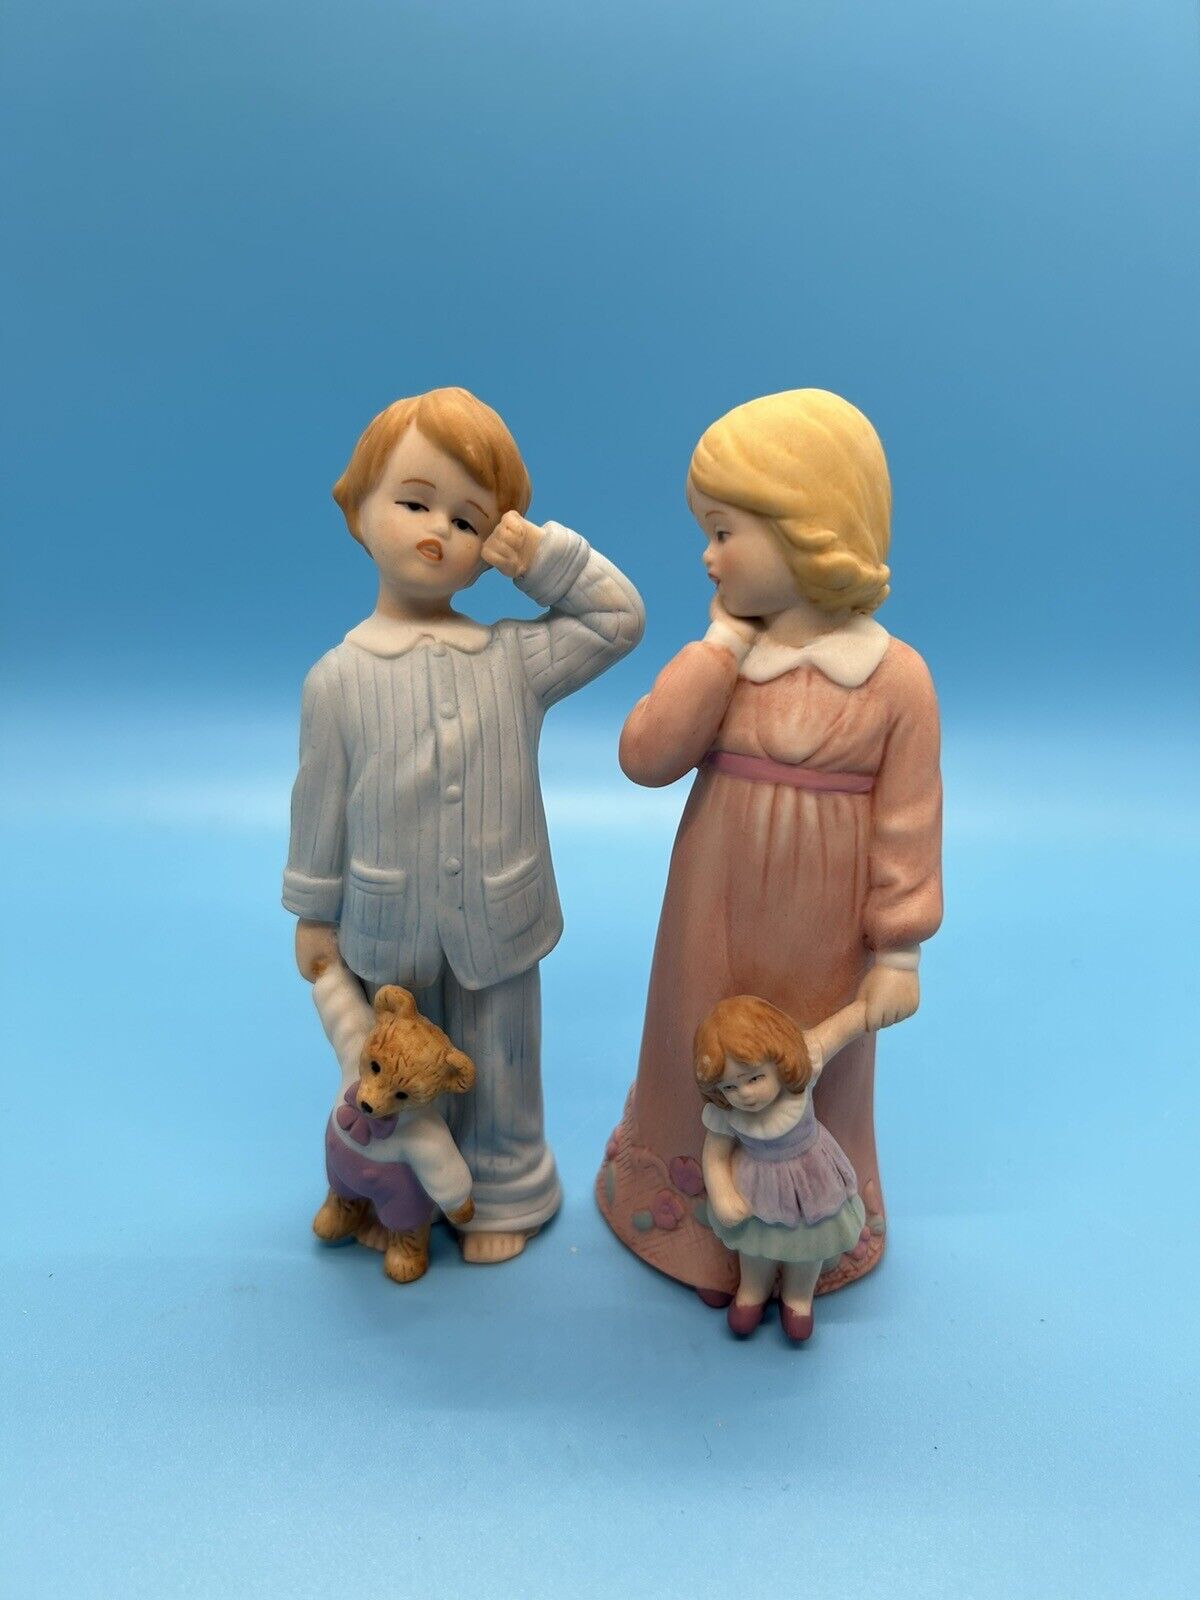 Sleepy Time Children Figurine 1998 Home and Garden Set of Two   